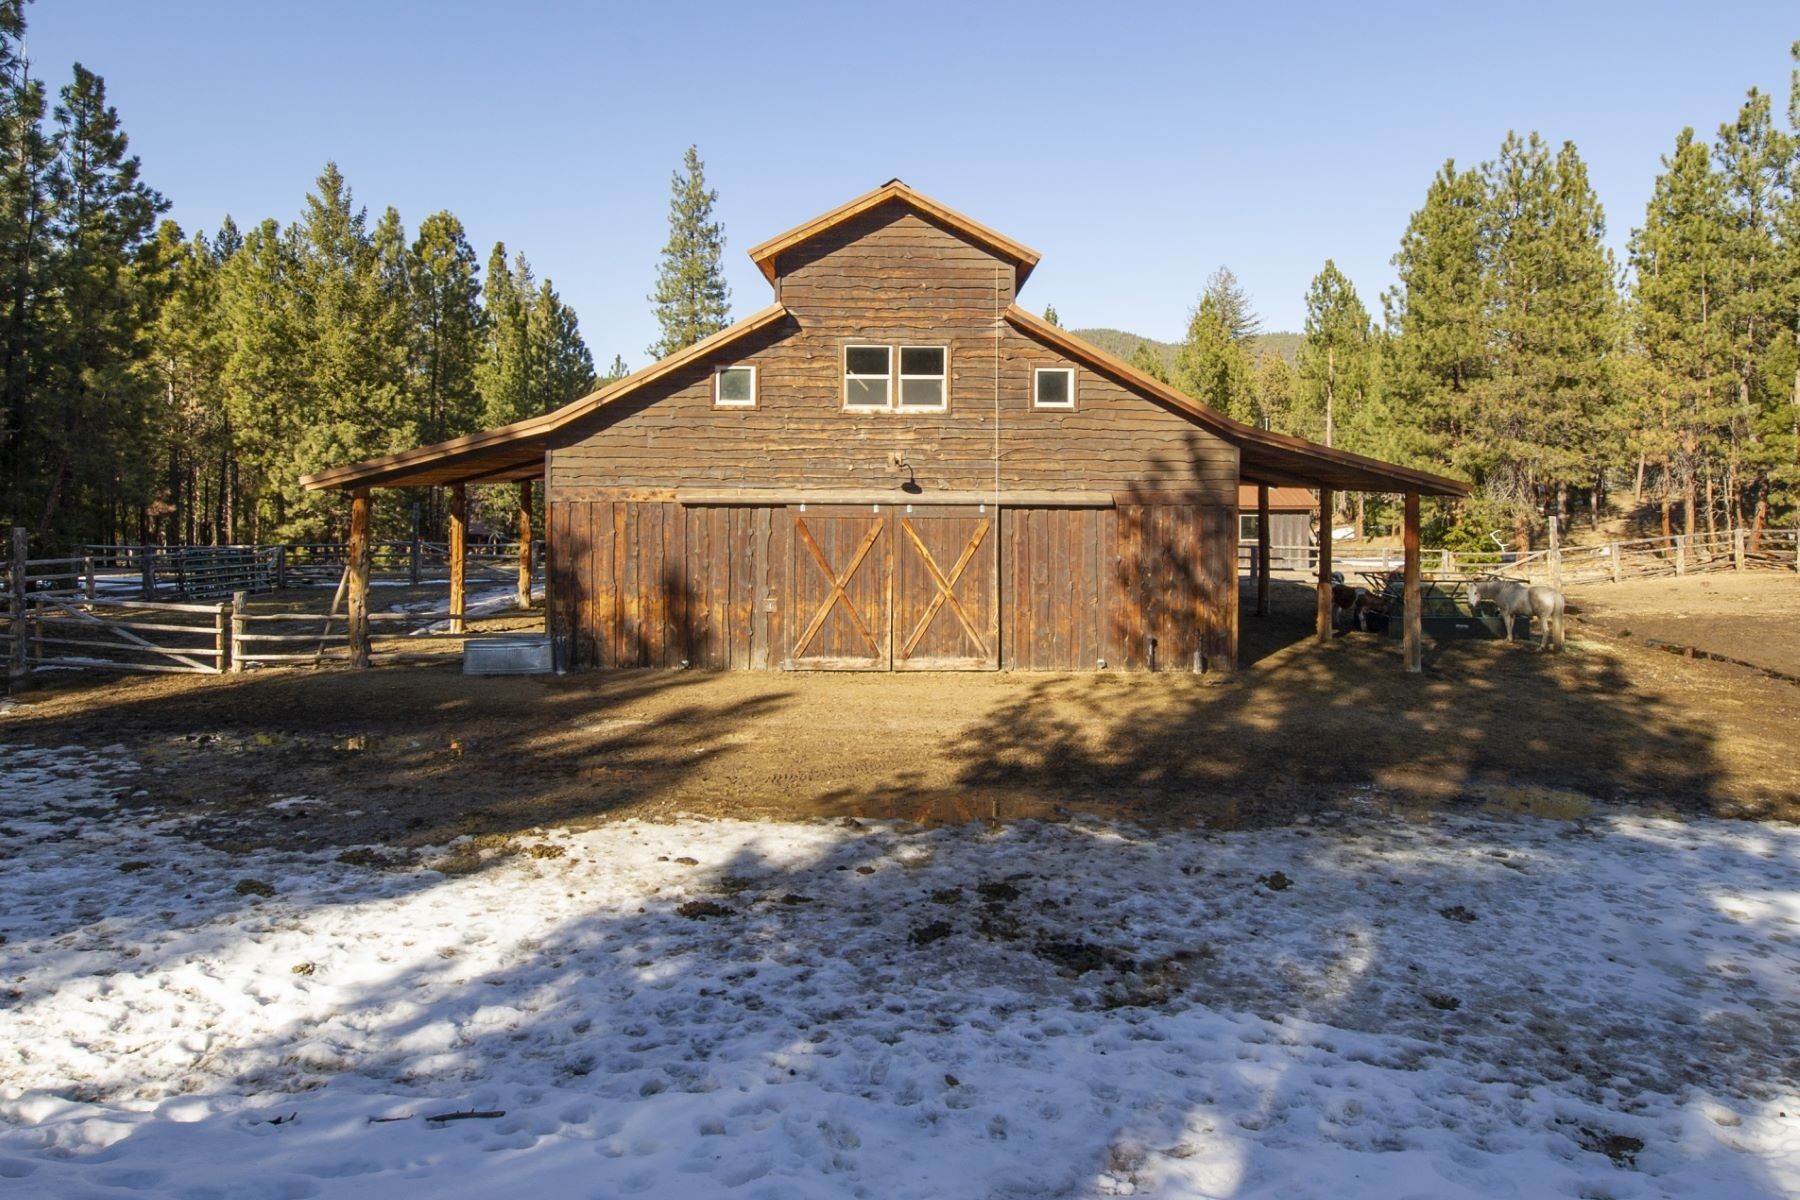 18. Farm and Ranch Properties for Sale at 27850 NE Old Wolf Creek Road Prineville, OR 97754 27850 NE Old Wolf Creek Road Prineville, Oregon 97754 United States